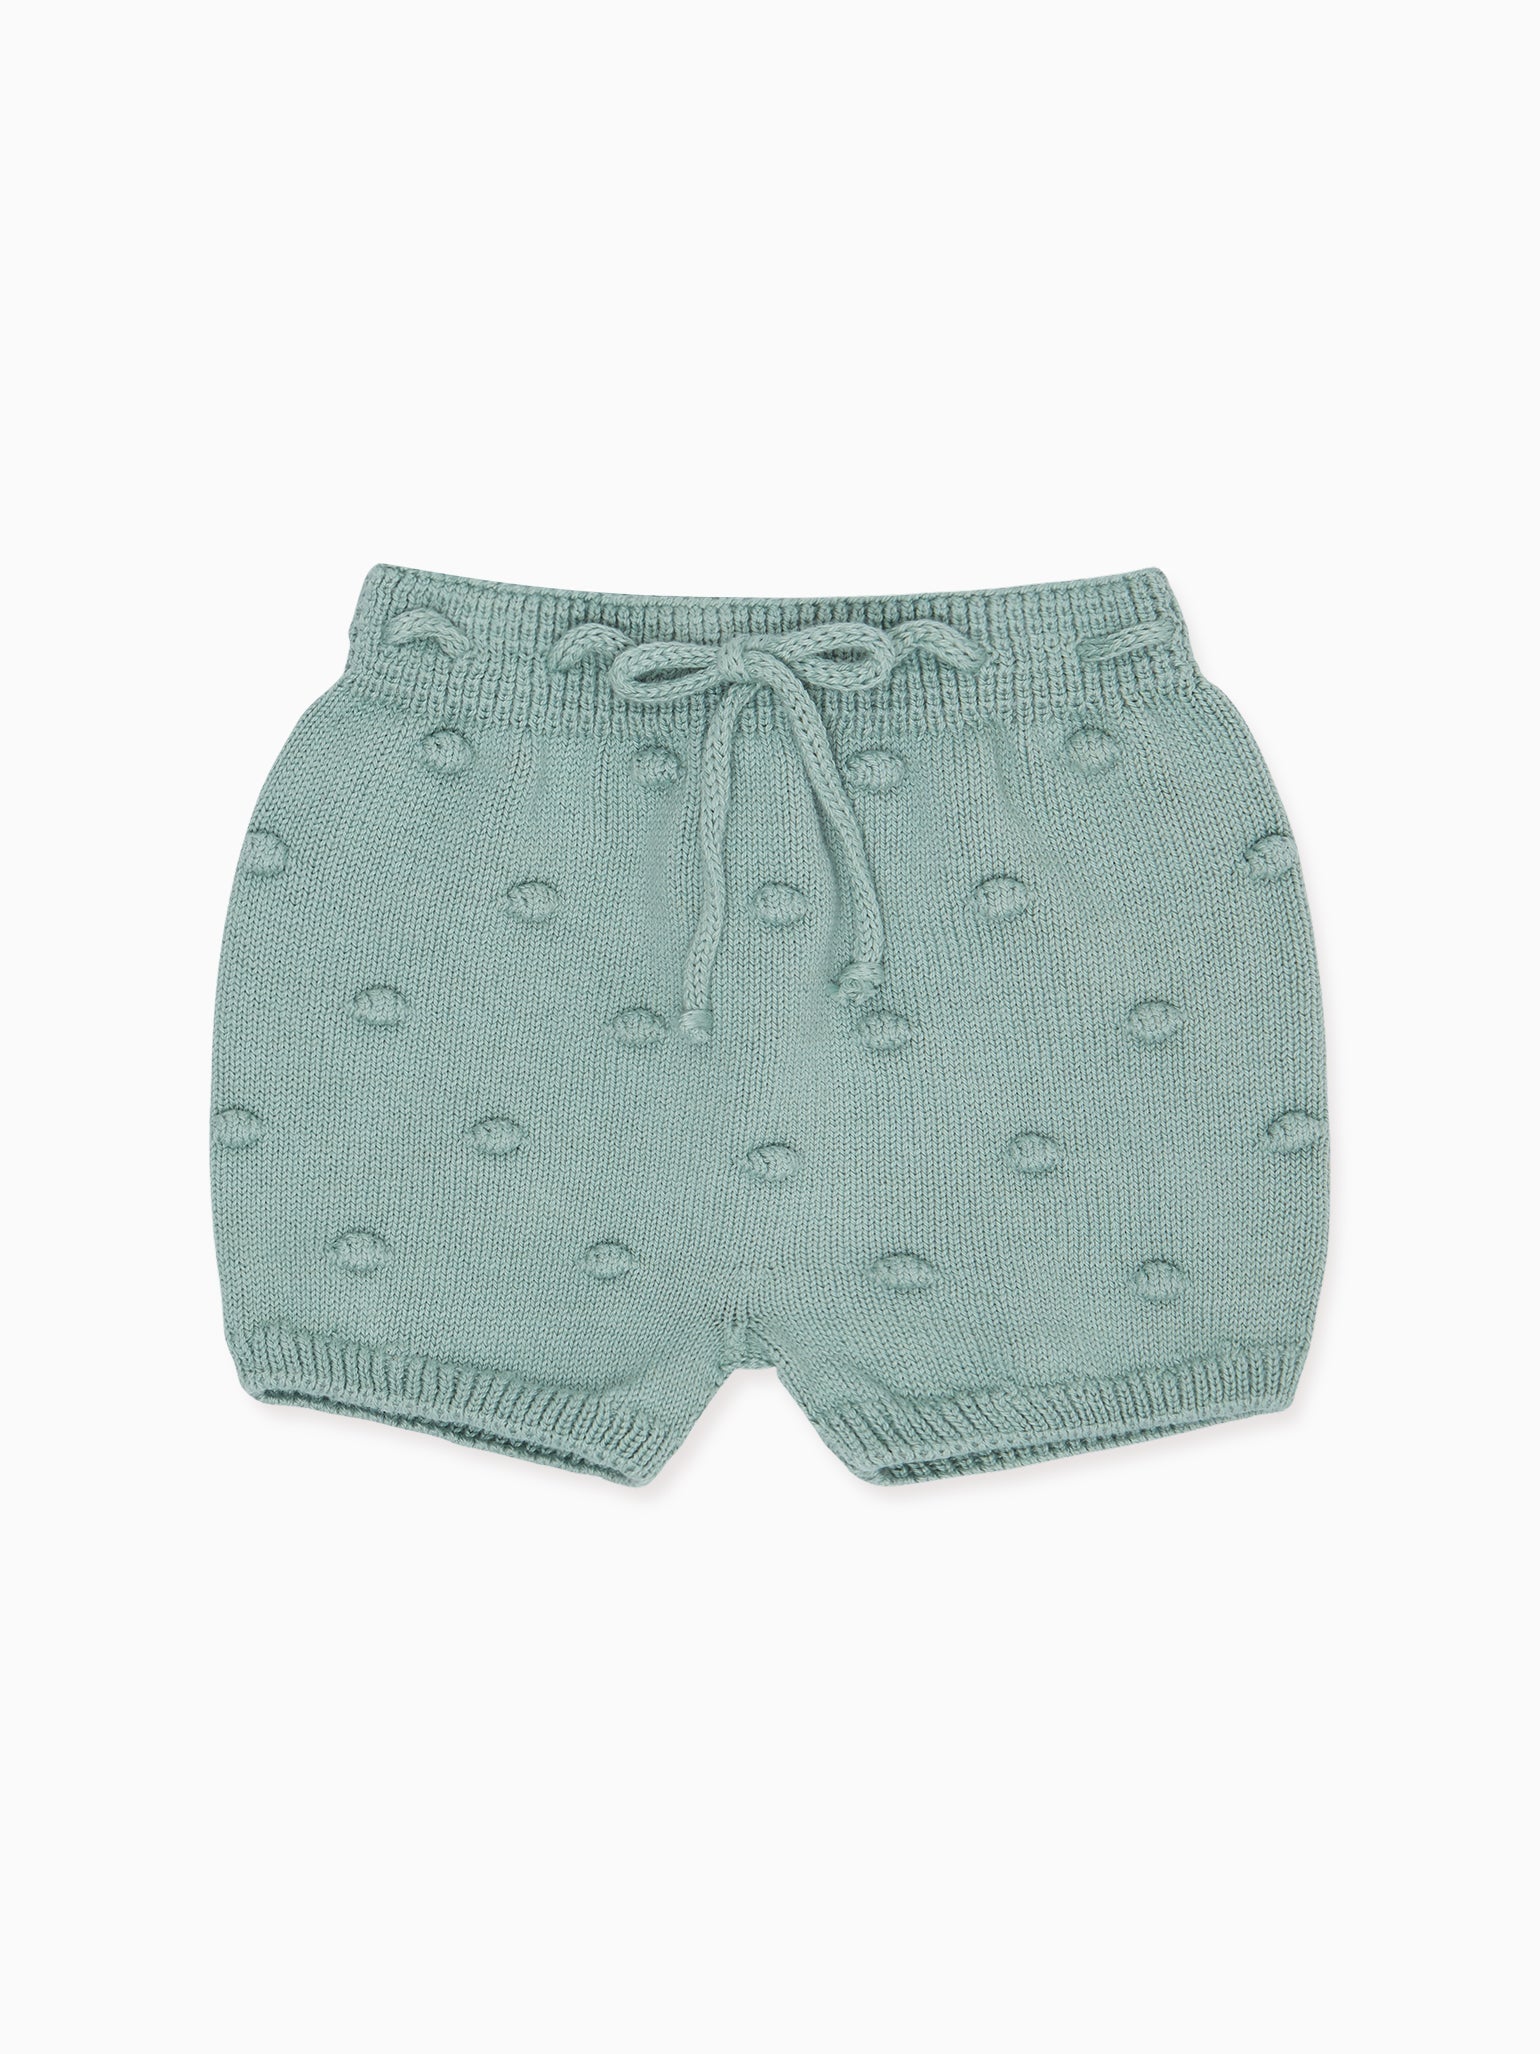 Sage Tia Cotton Baby Knitted Bloomer